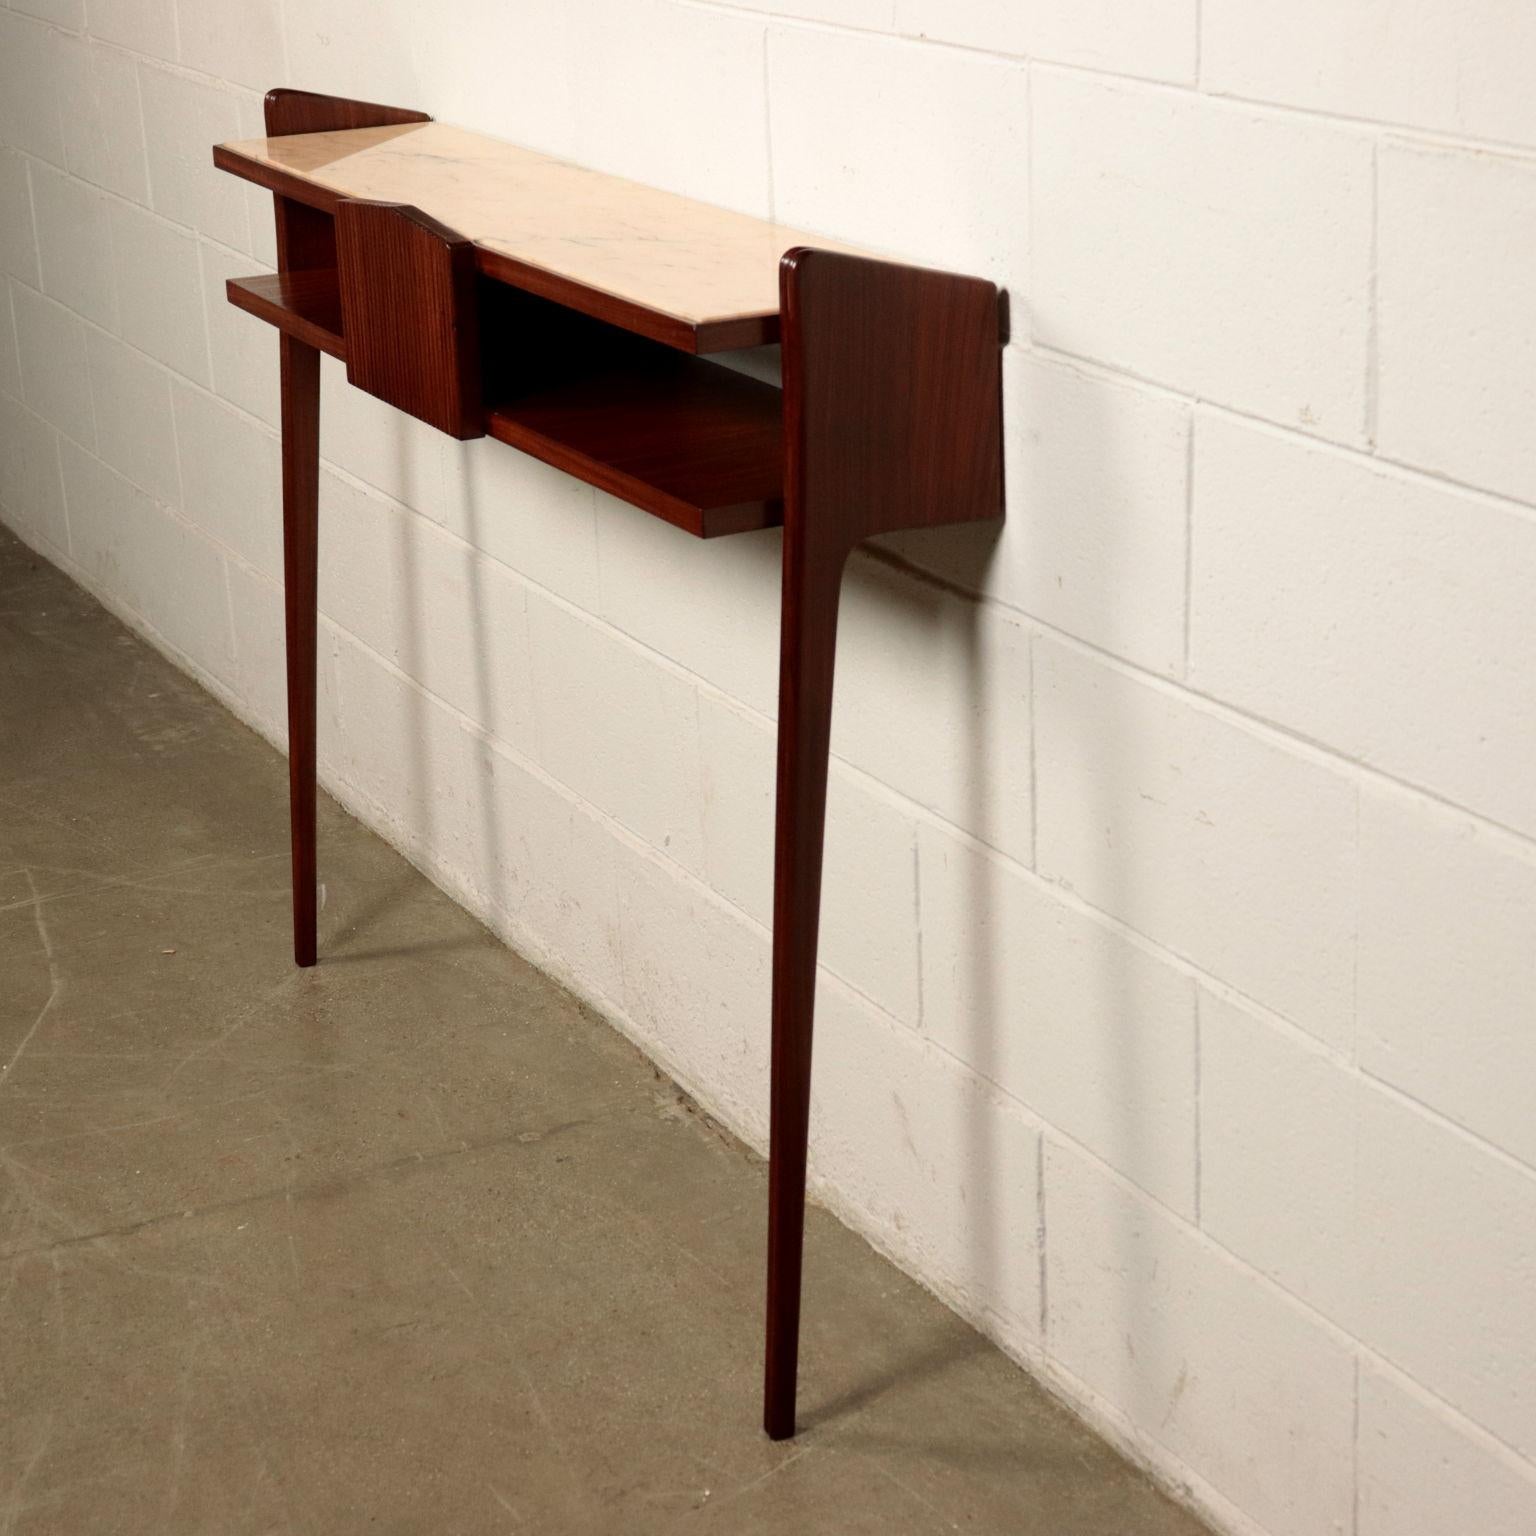 Wall console; Mahogany wood, front with 